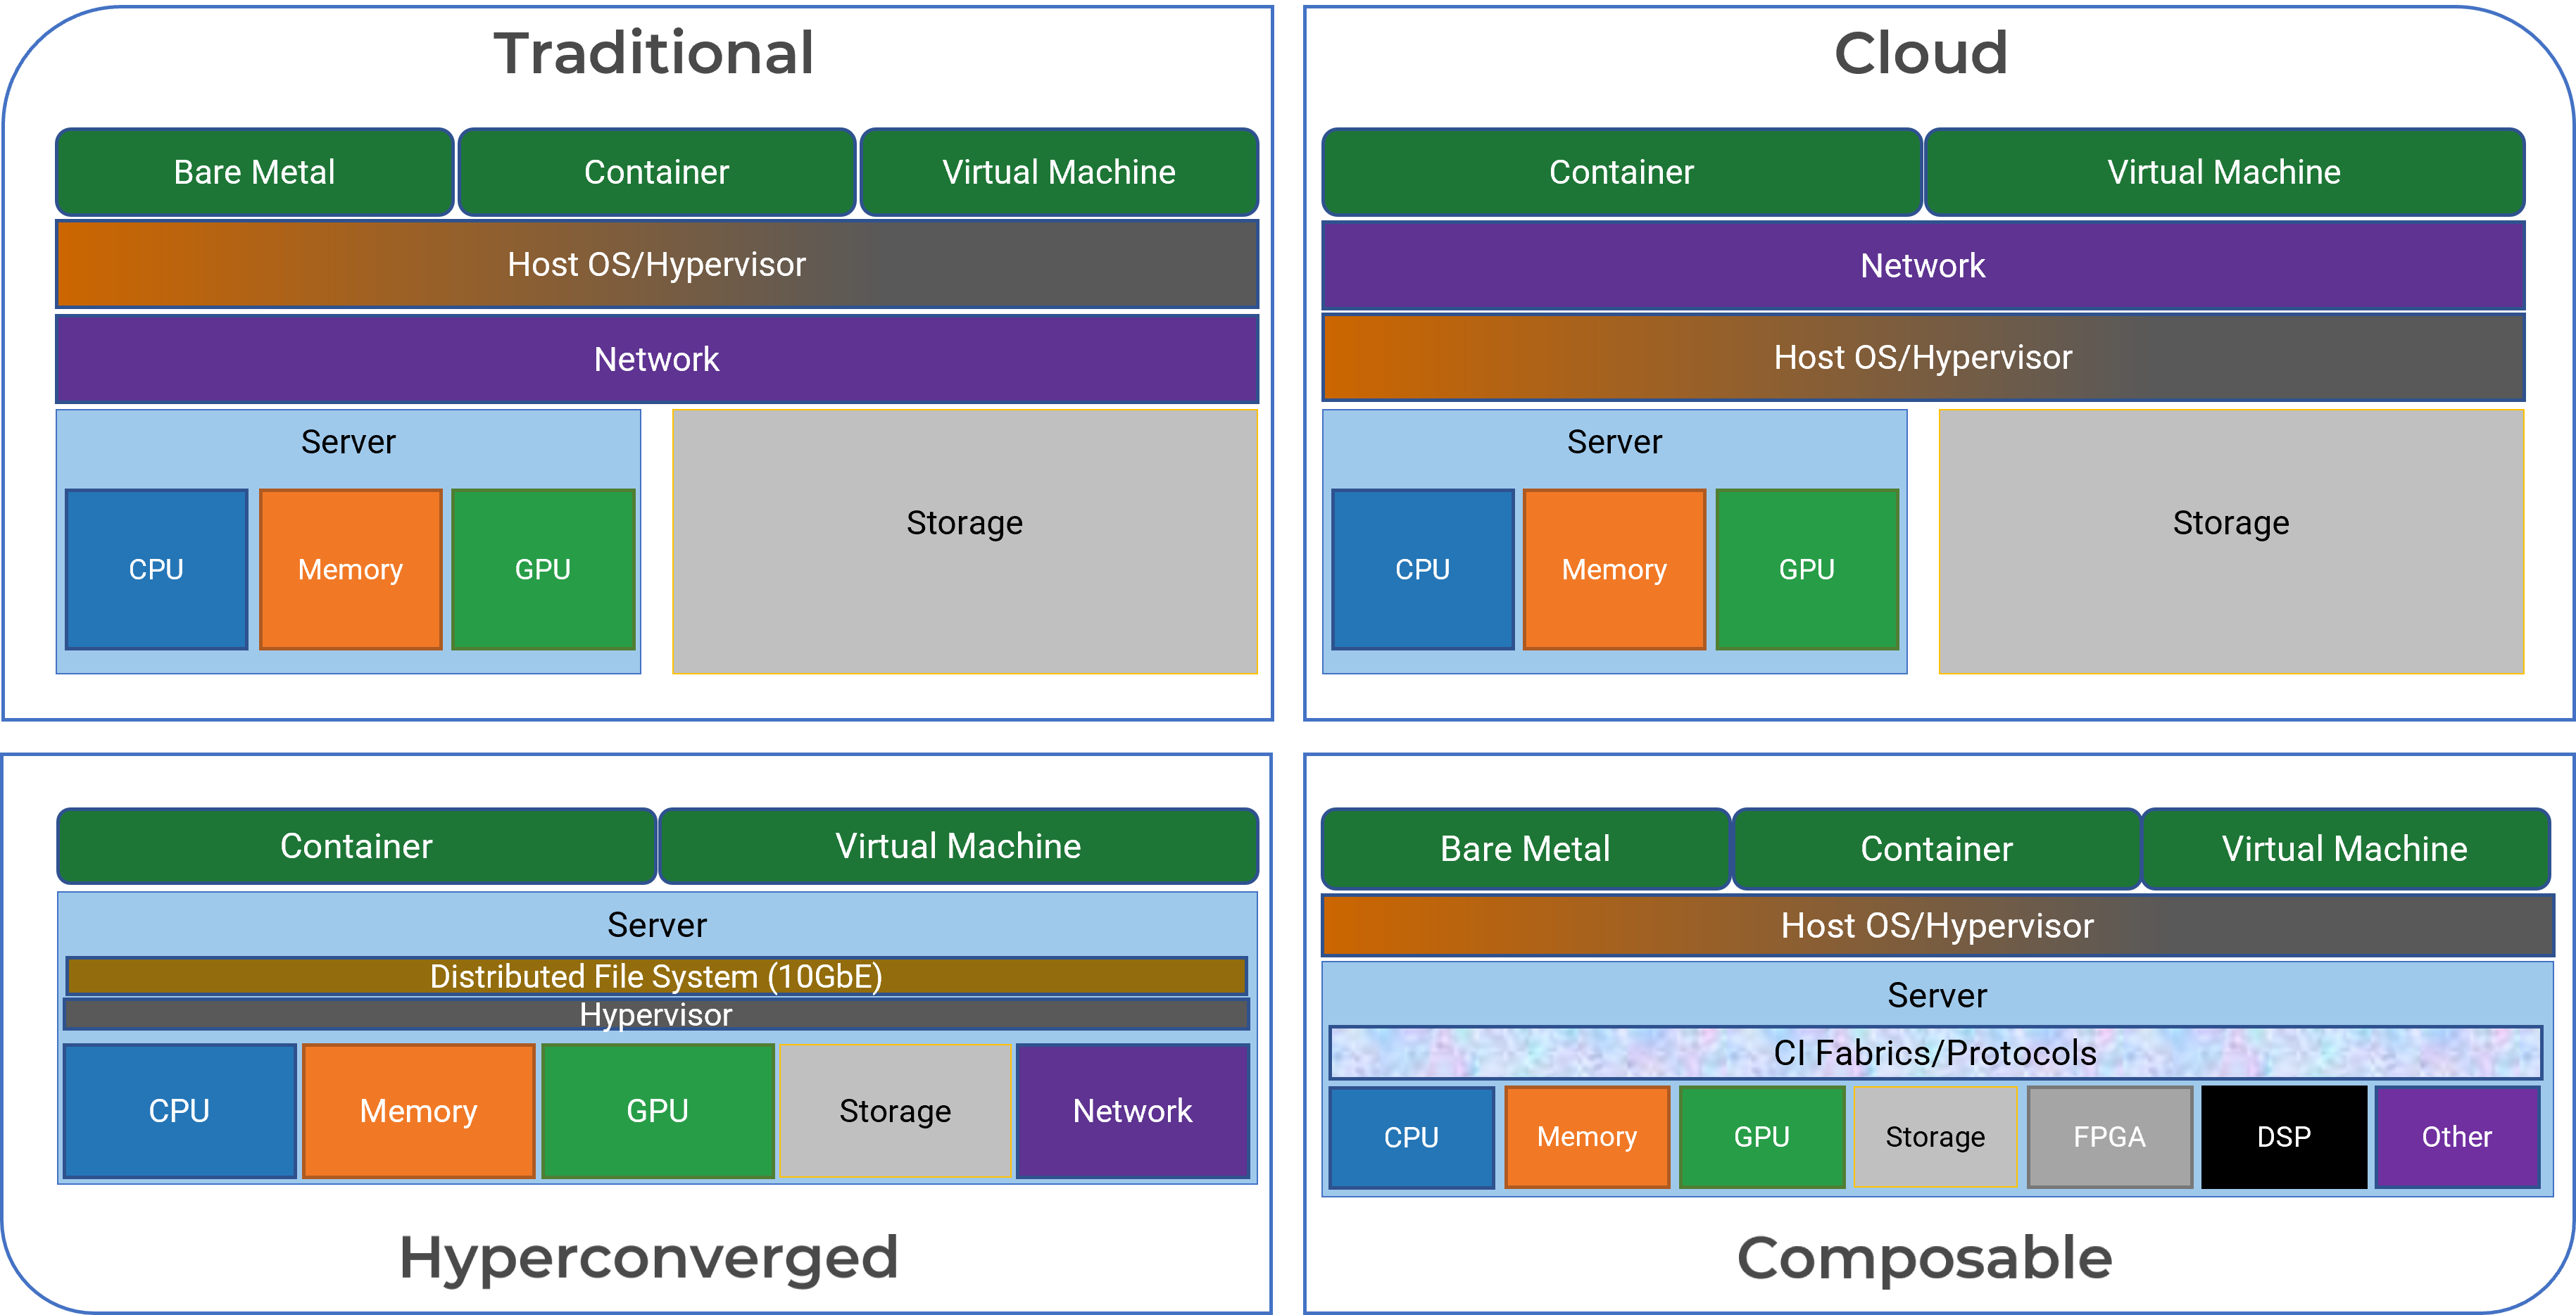 This image shows the similarities and differences between traditional, cloud, hyperconverged, and composable.